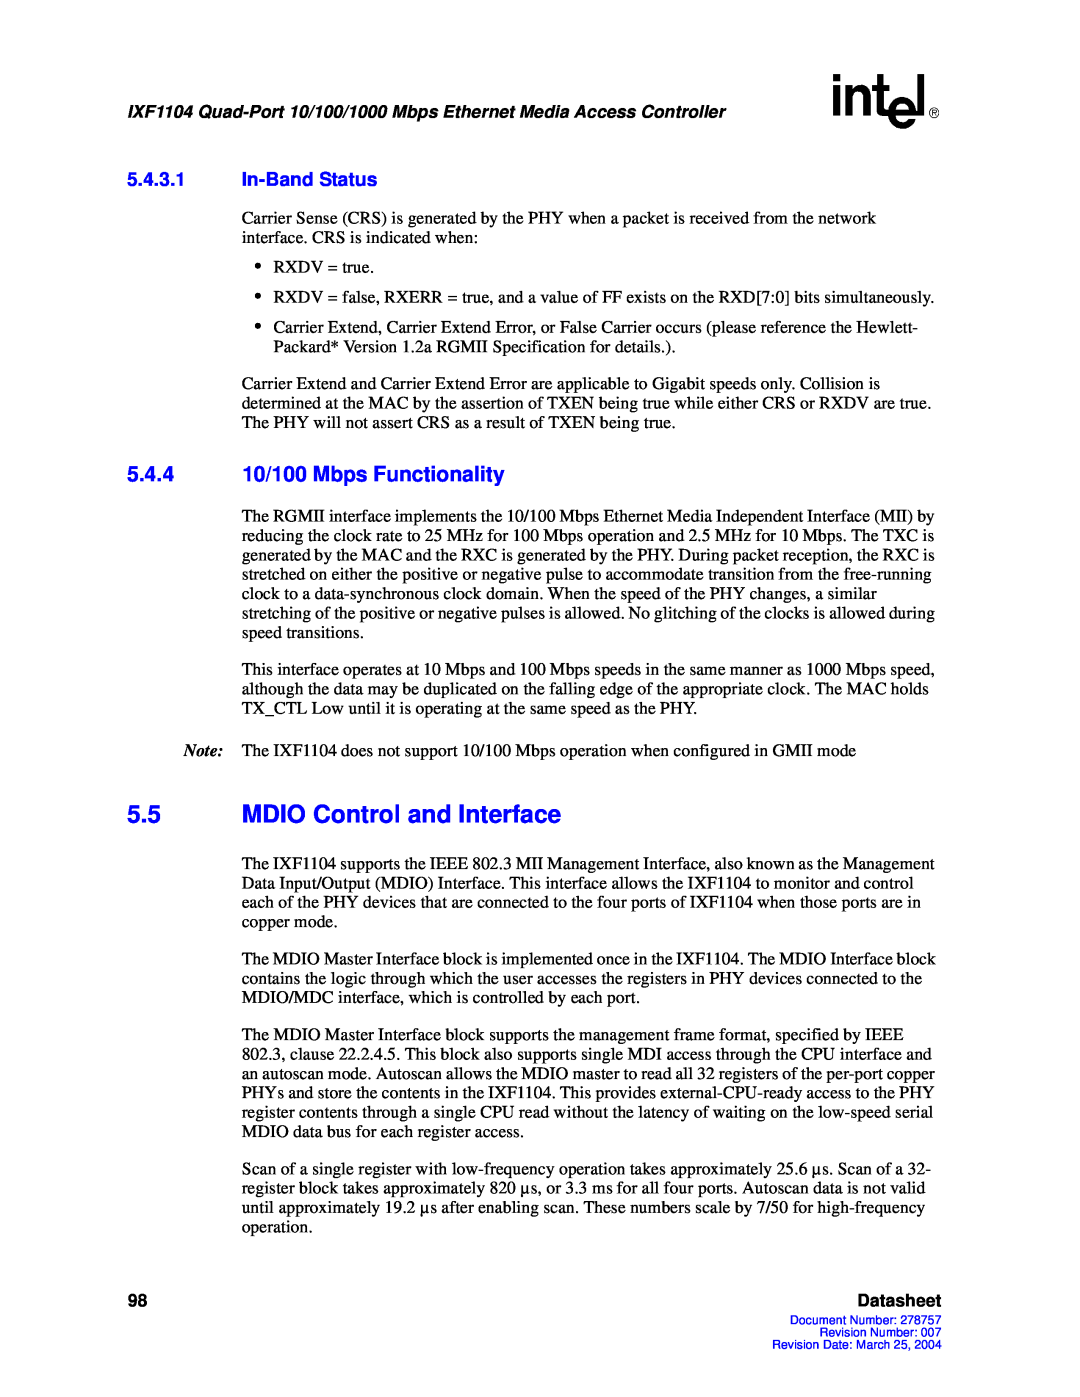 Intel IXF1104 manual 5.5MDIO Control and Interface, 5.4.410/100 Mbps Functionality, 5.4.3.1In-BandStatus, Datasheet 